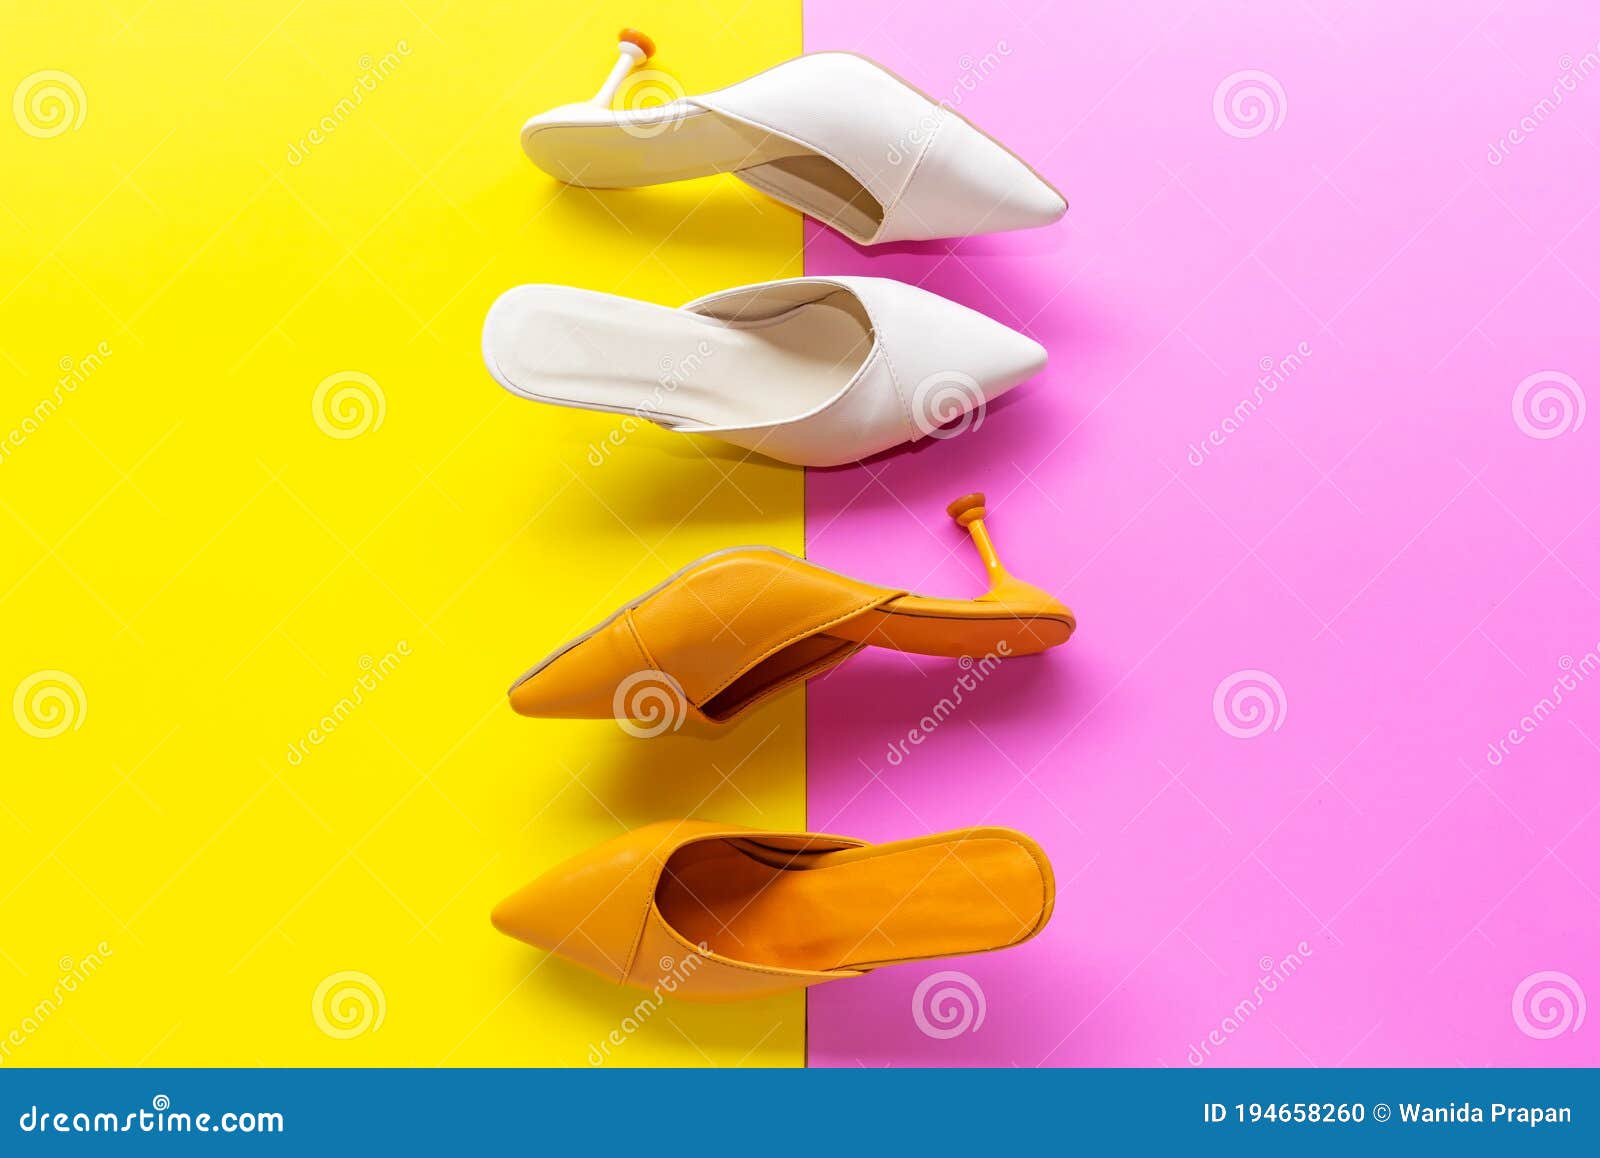 Top View. Fashion Shoe Woman Accessories Set Stock Photo - Image of ...